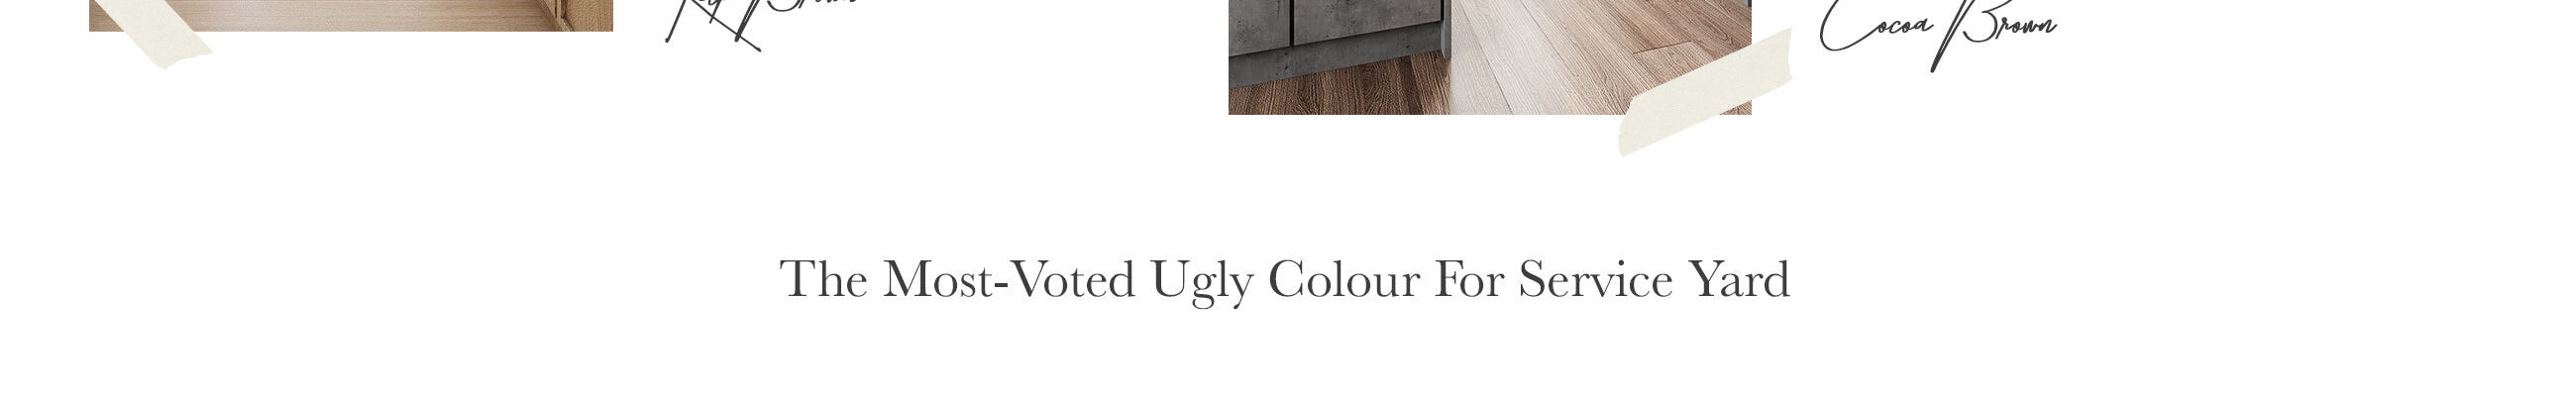 The Most-Voted Ugly Colour For Service Yard